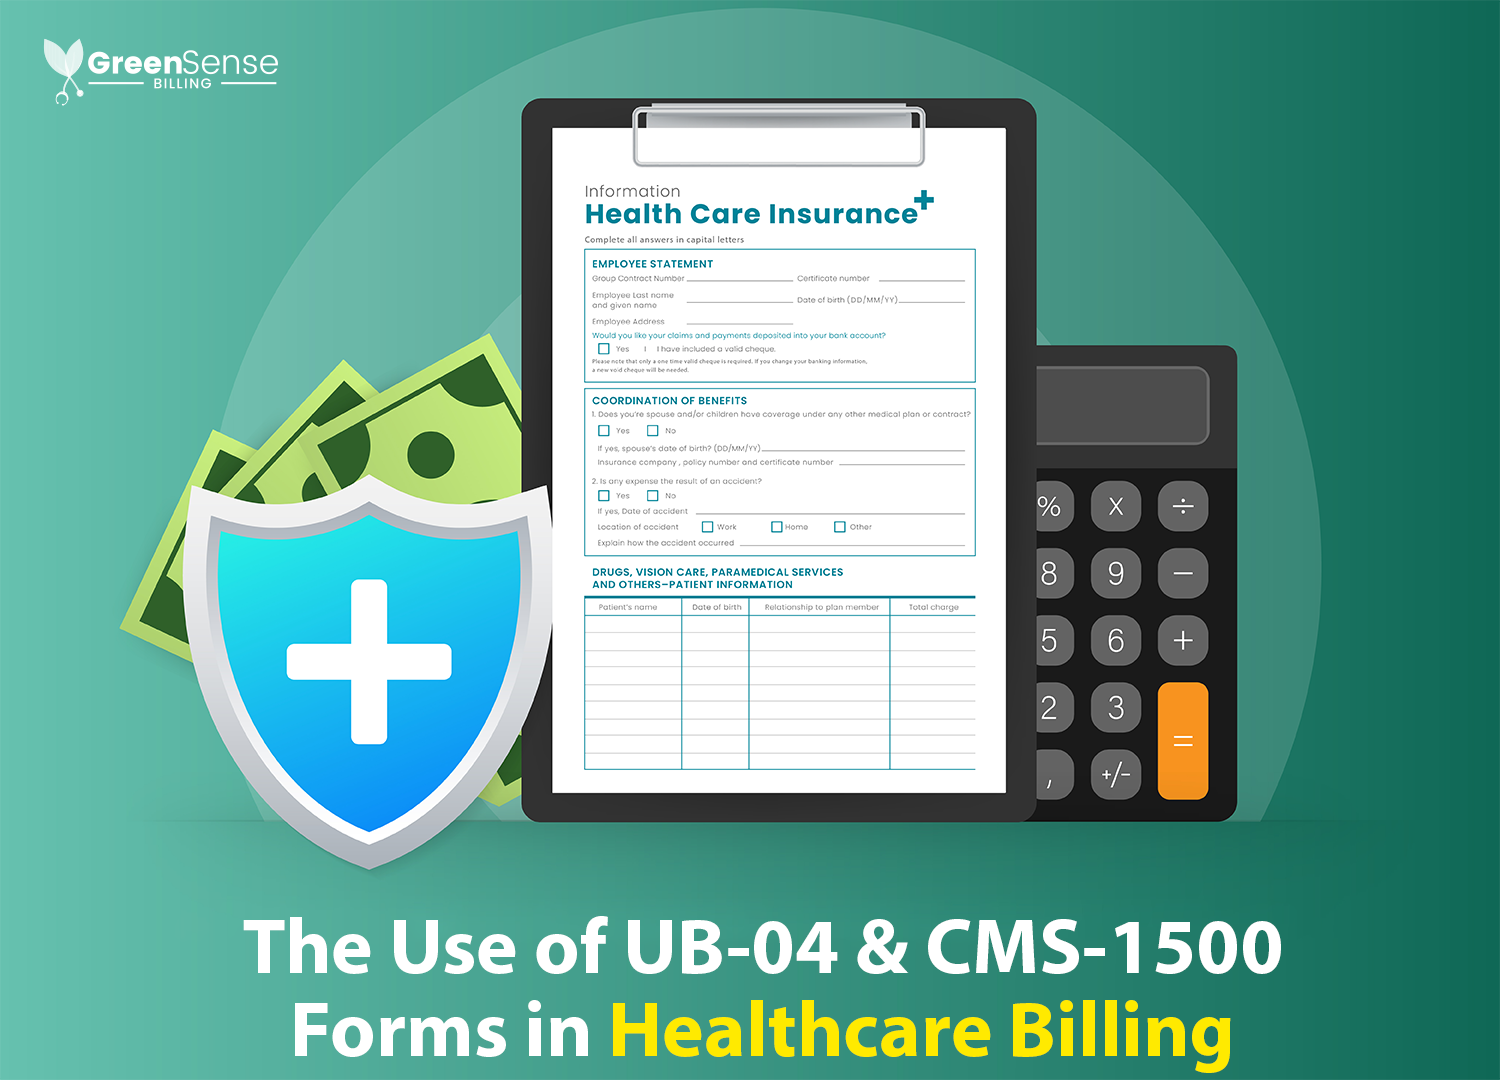 Usage of UB-04 and CMS-1500 forms